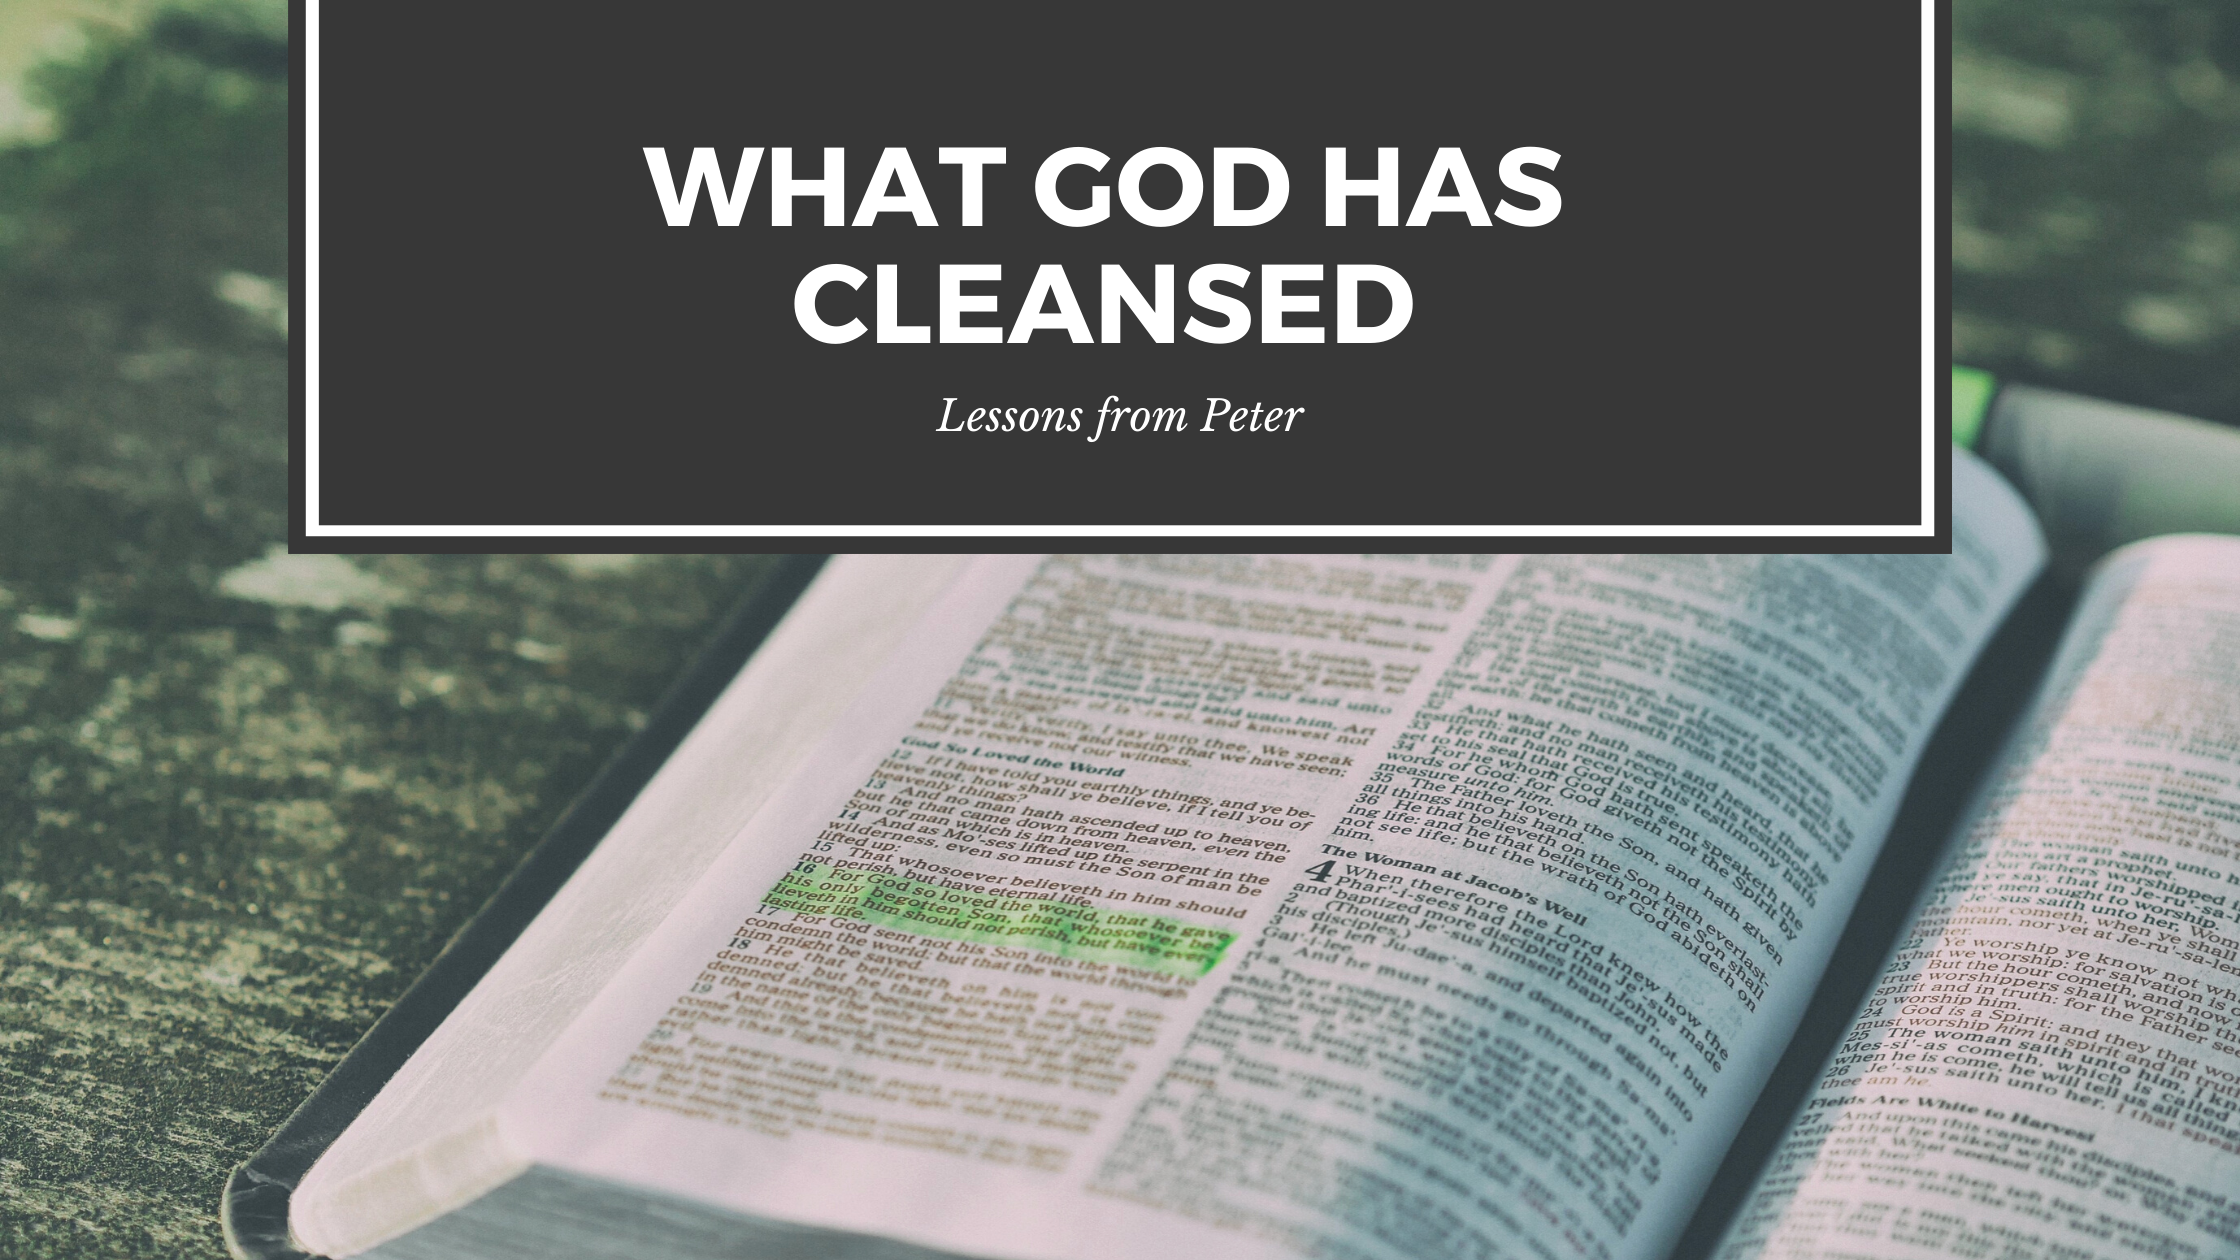 What God Has Cleansed blog title with Bible in background